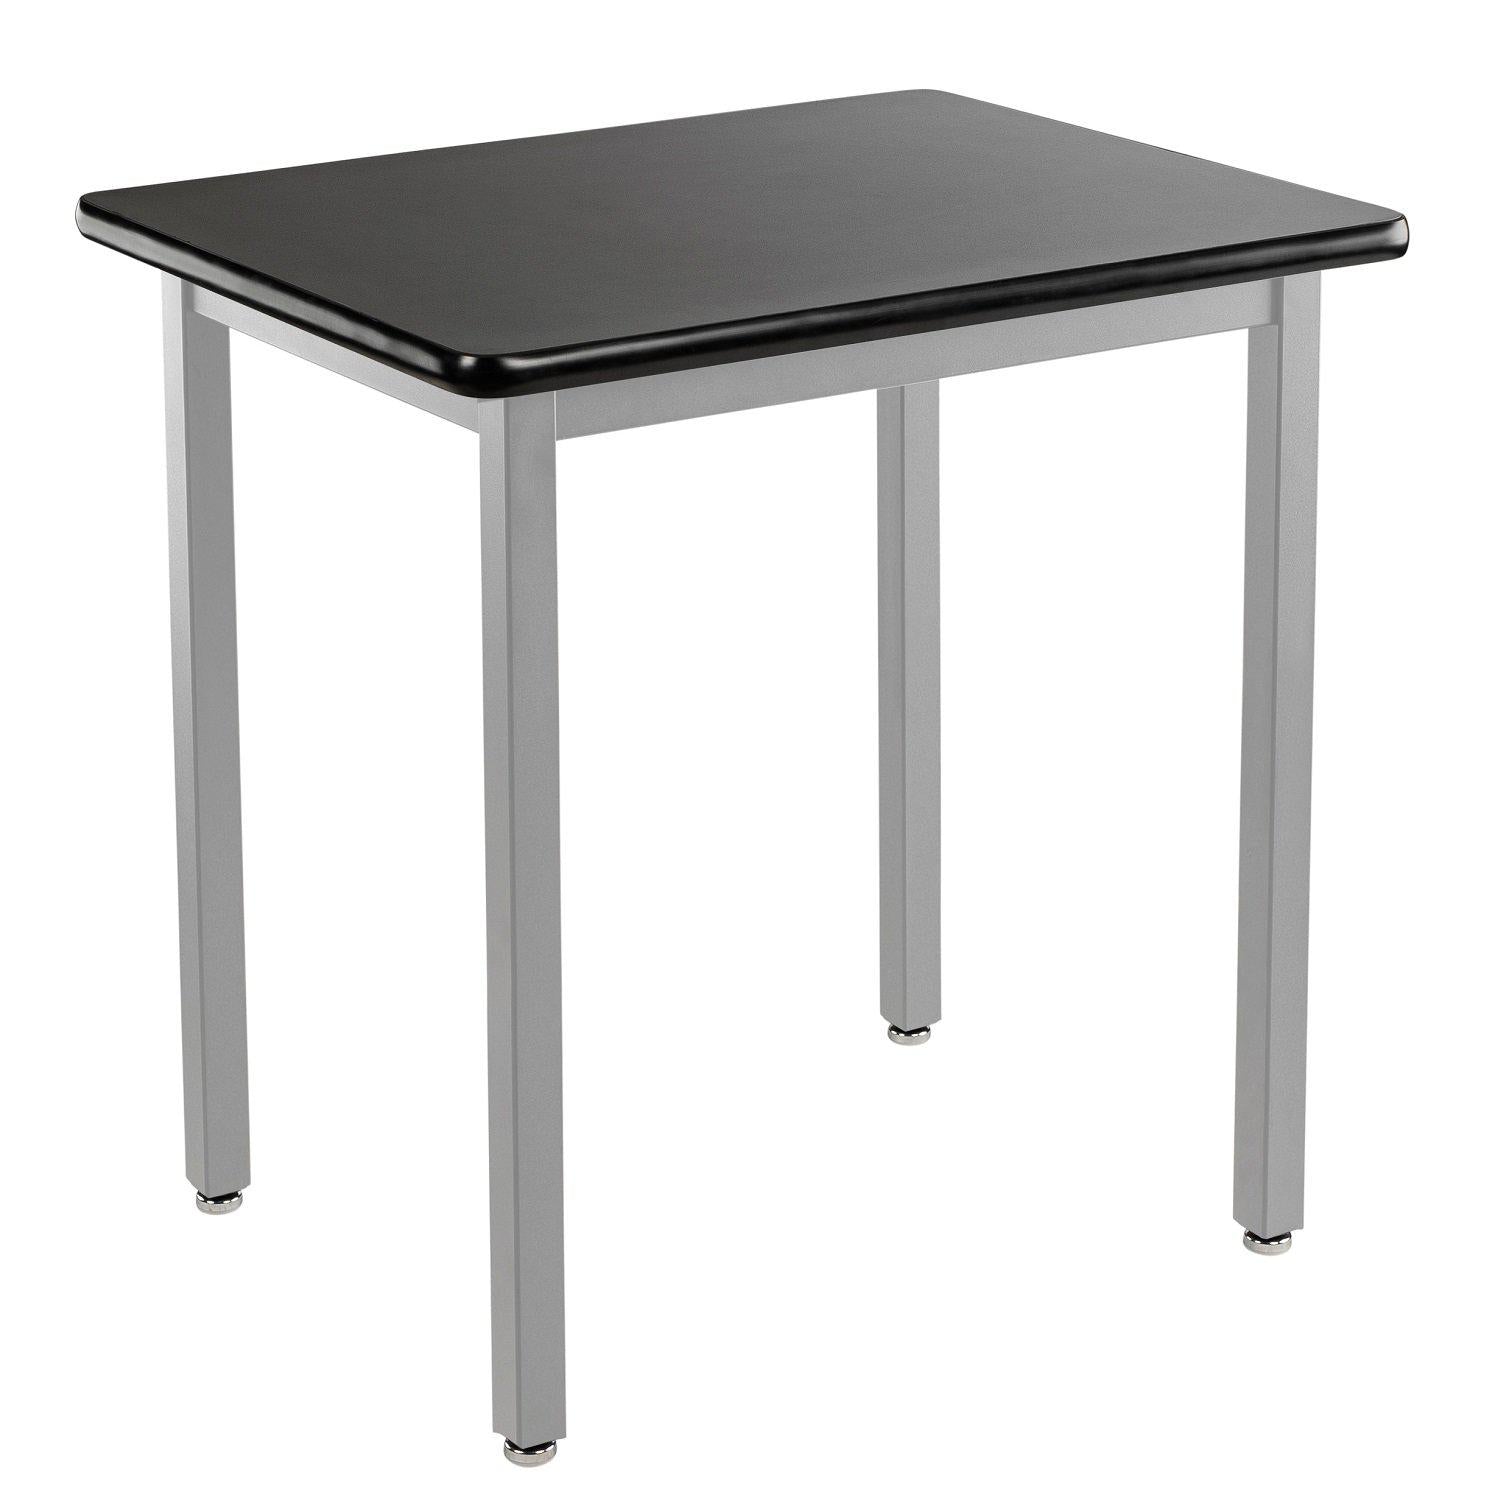 Heavy-Duty Fixed Height Utility Table, Soft Grey Frame, 30" x 36", High-Pressure Laminate Top with T-Mold Edge